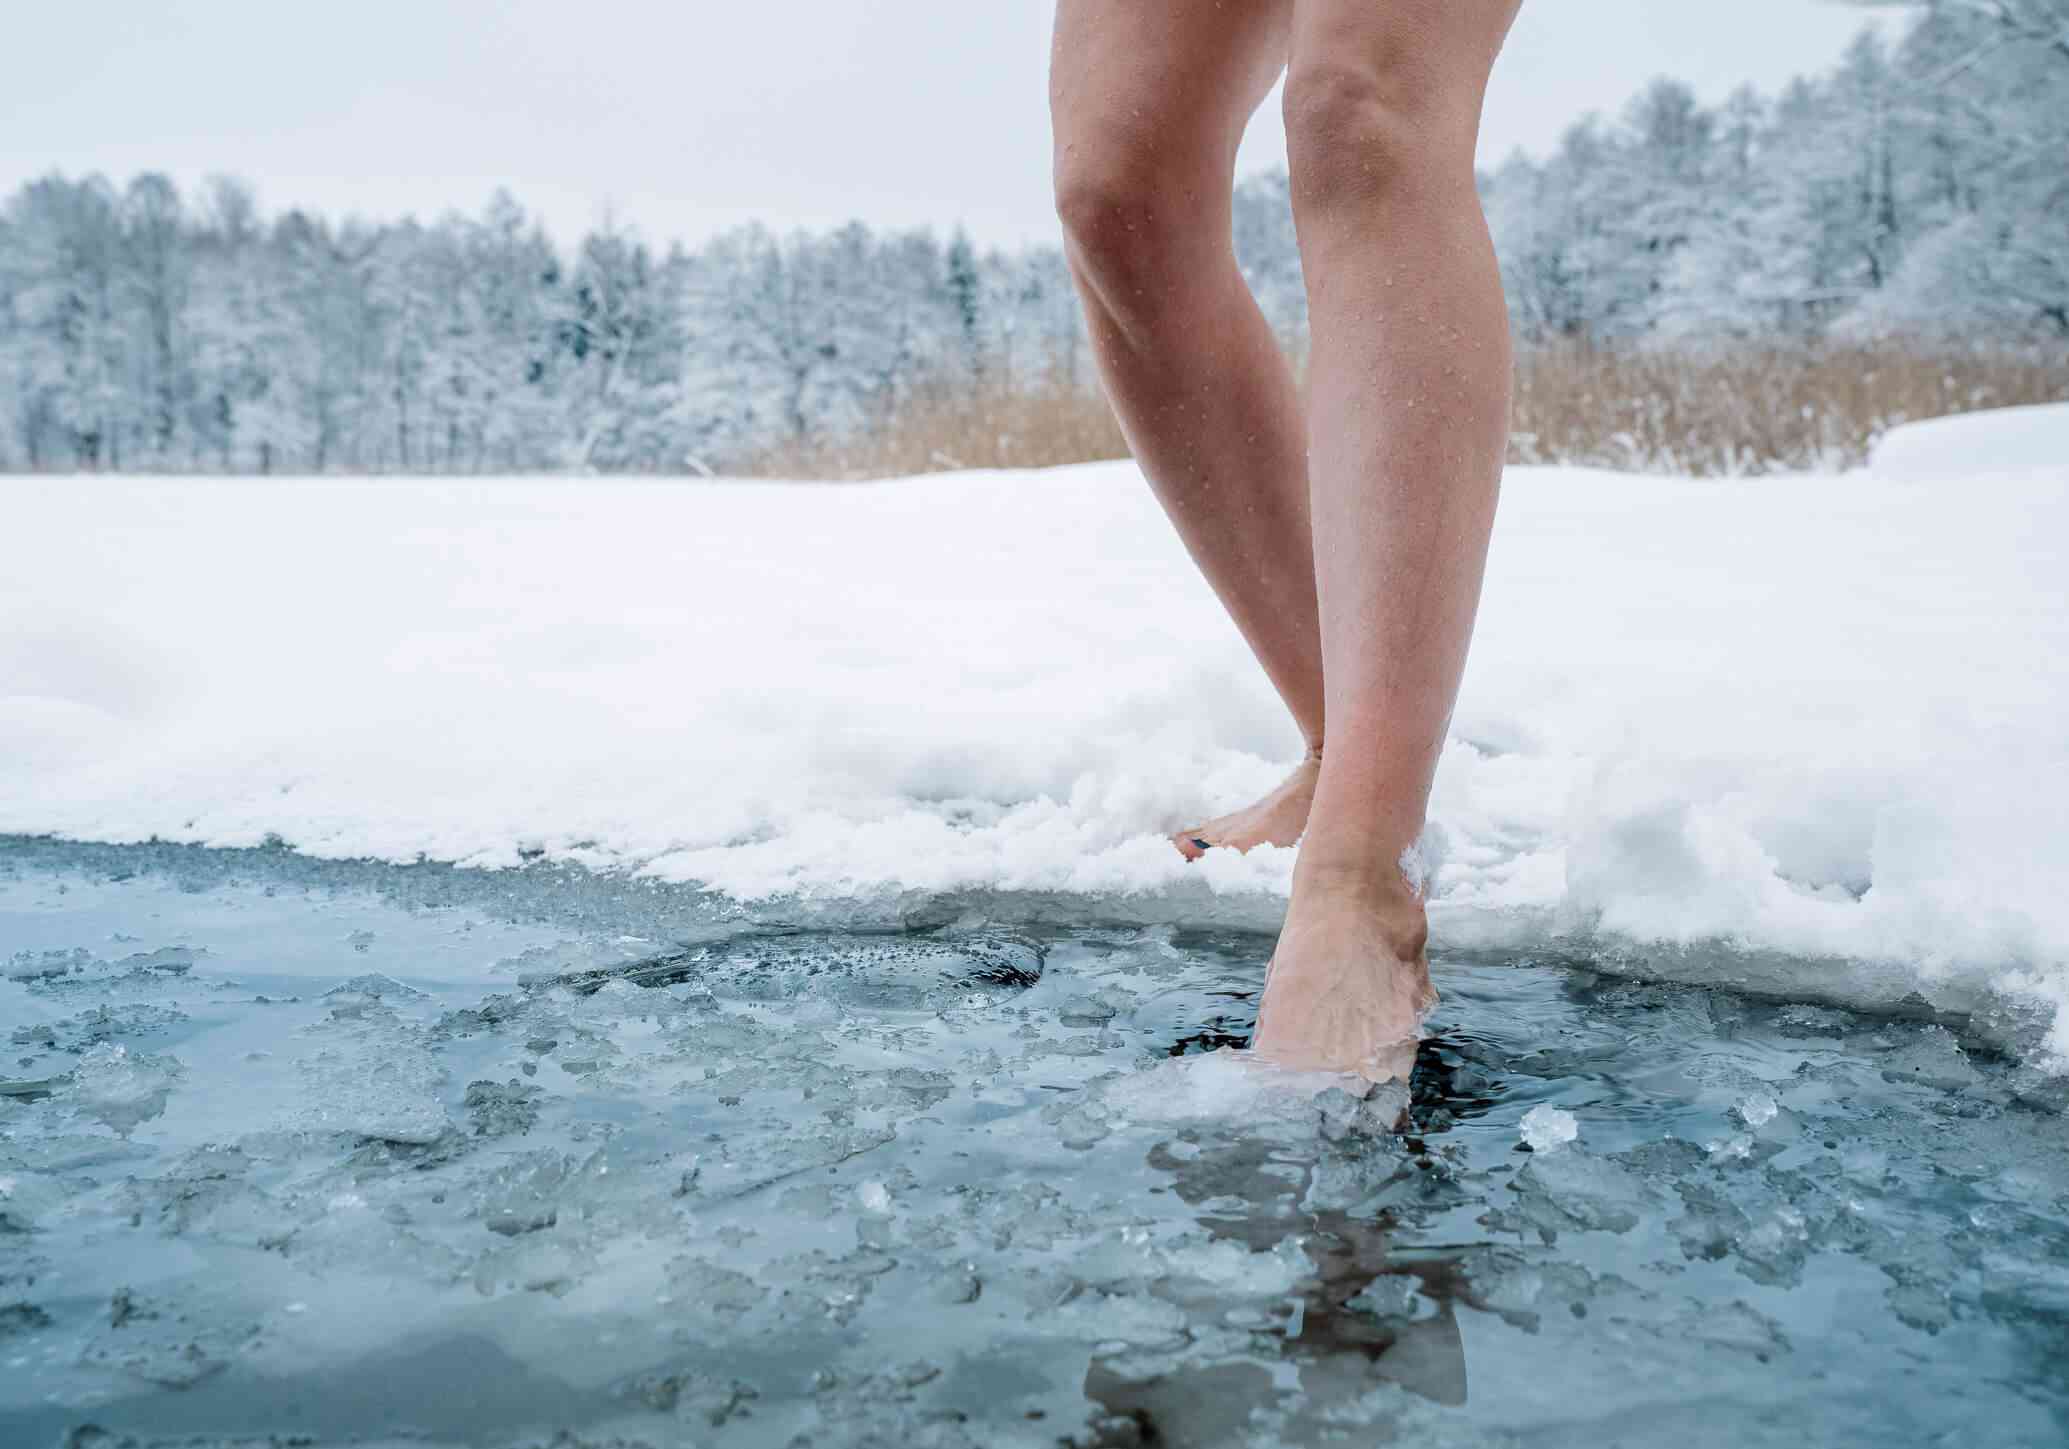 A close up of a woman dipping her bare feet into the cold water of a pond while surrounded by snow.